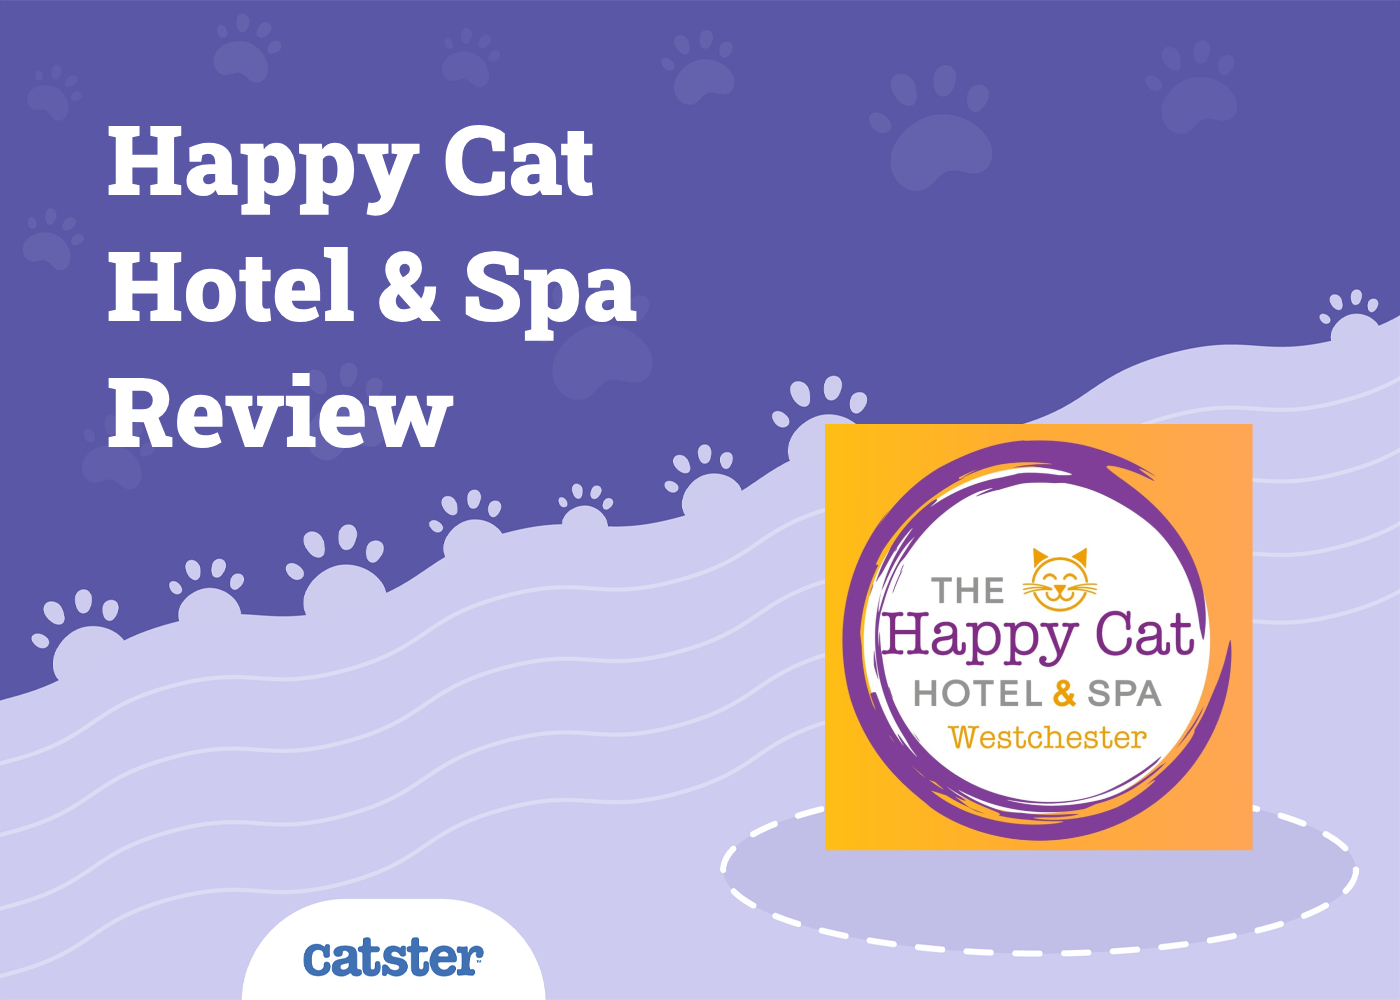 Happy Cat Hotel & Spa Review